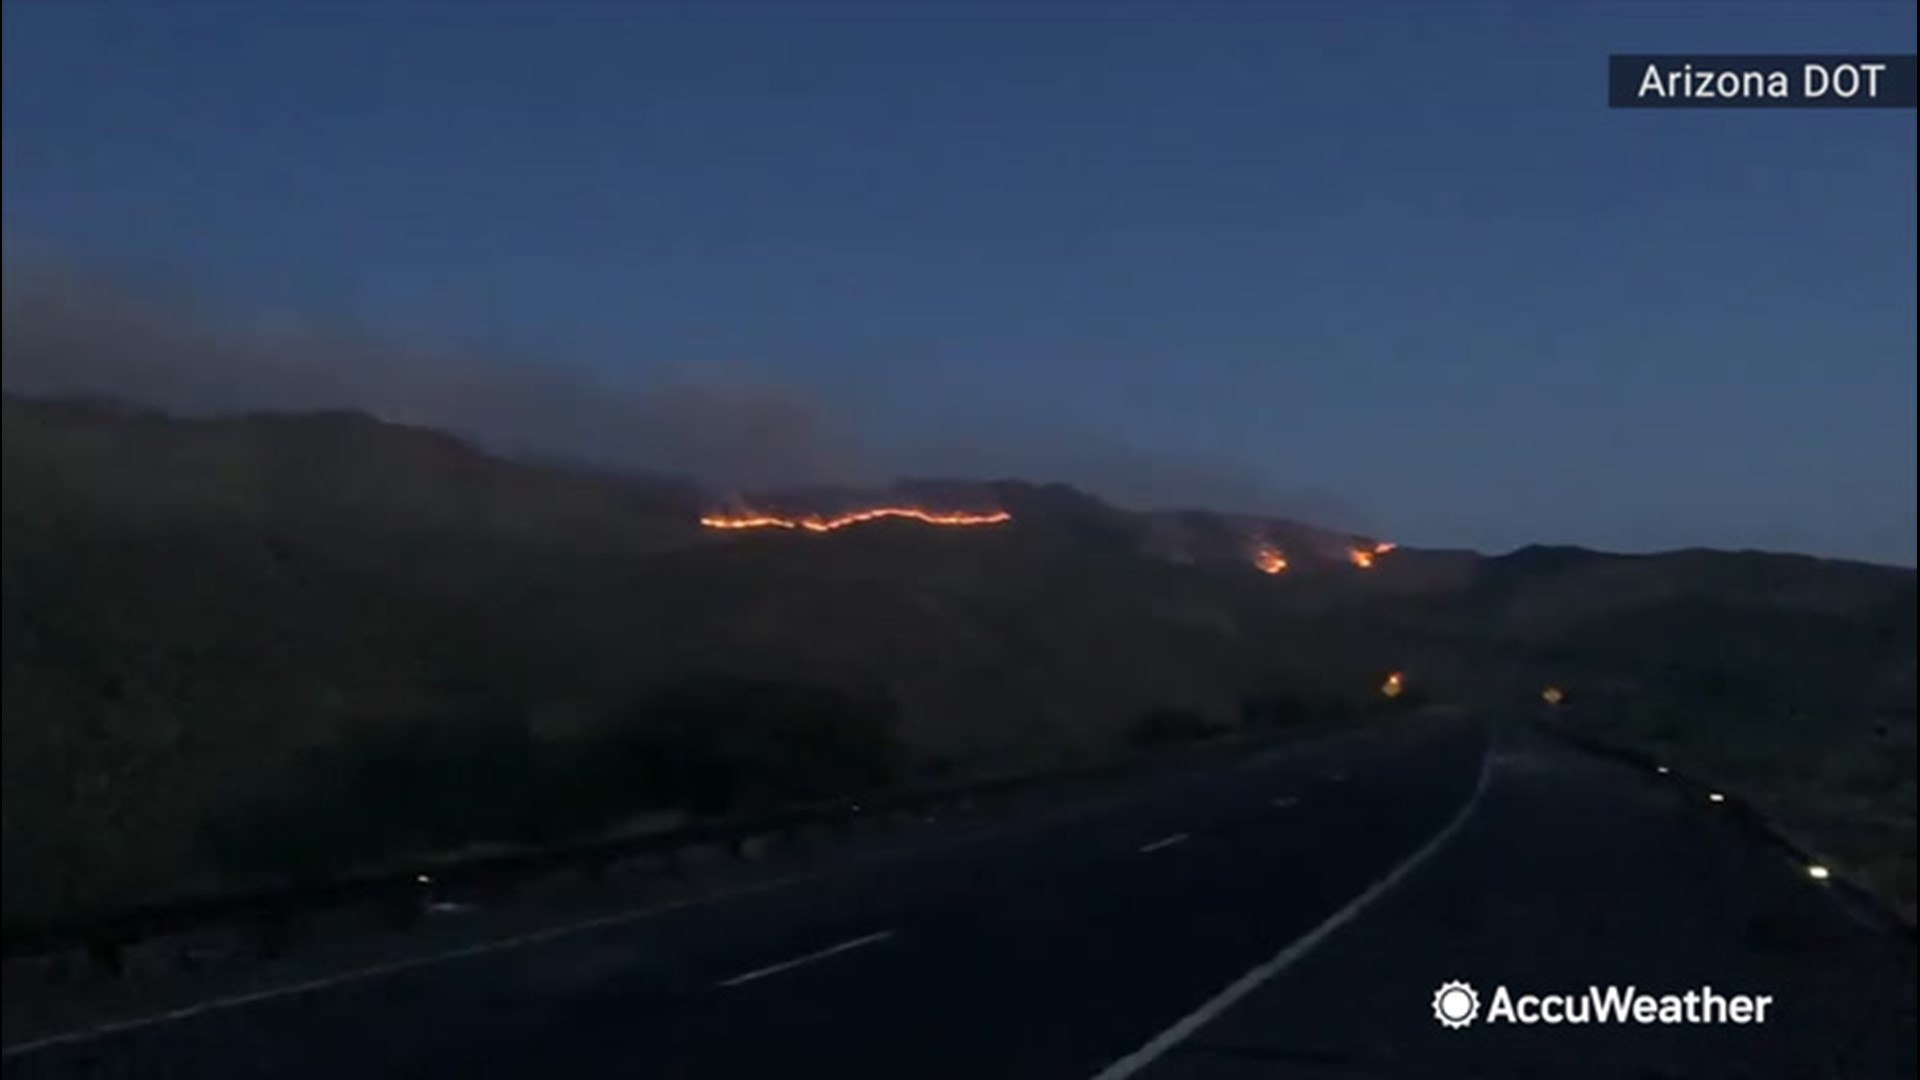 A wildfire raging in Tonto National Forest, Arizona, forced evacuation orders to be issued for nearby homes, and roads to close, as the fire grew on June 15.